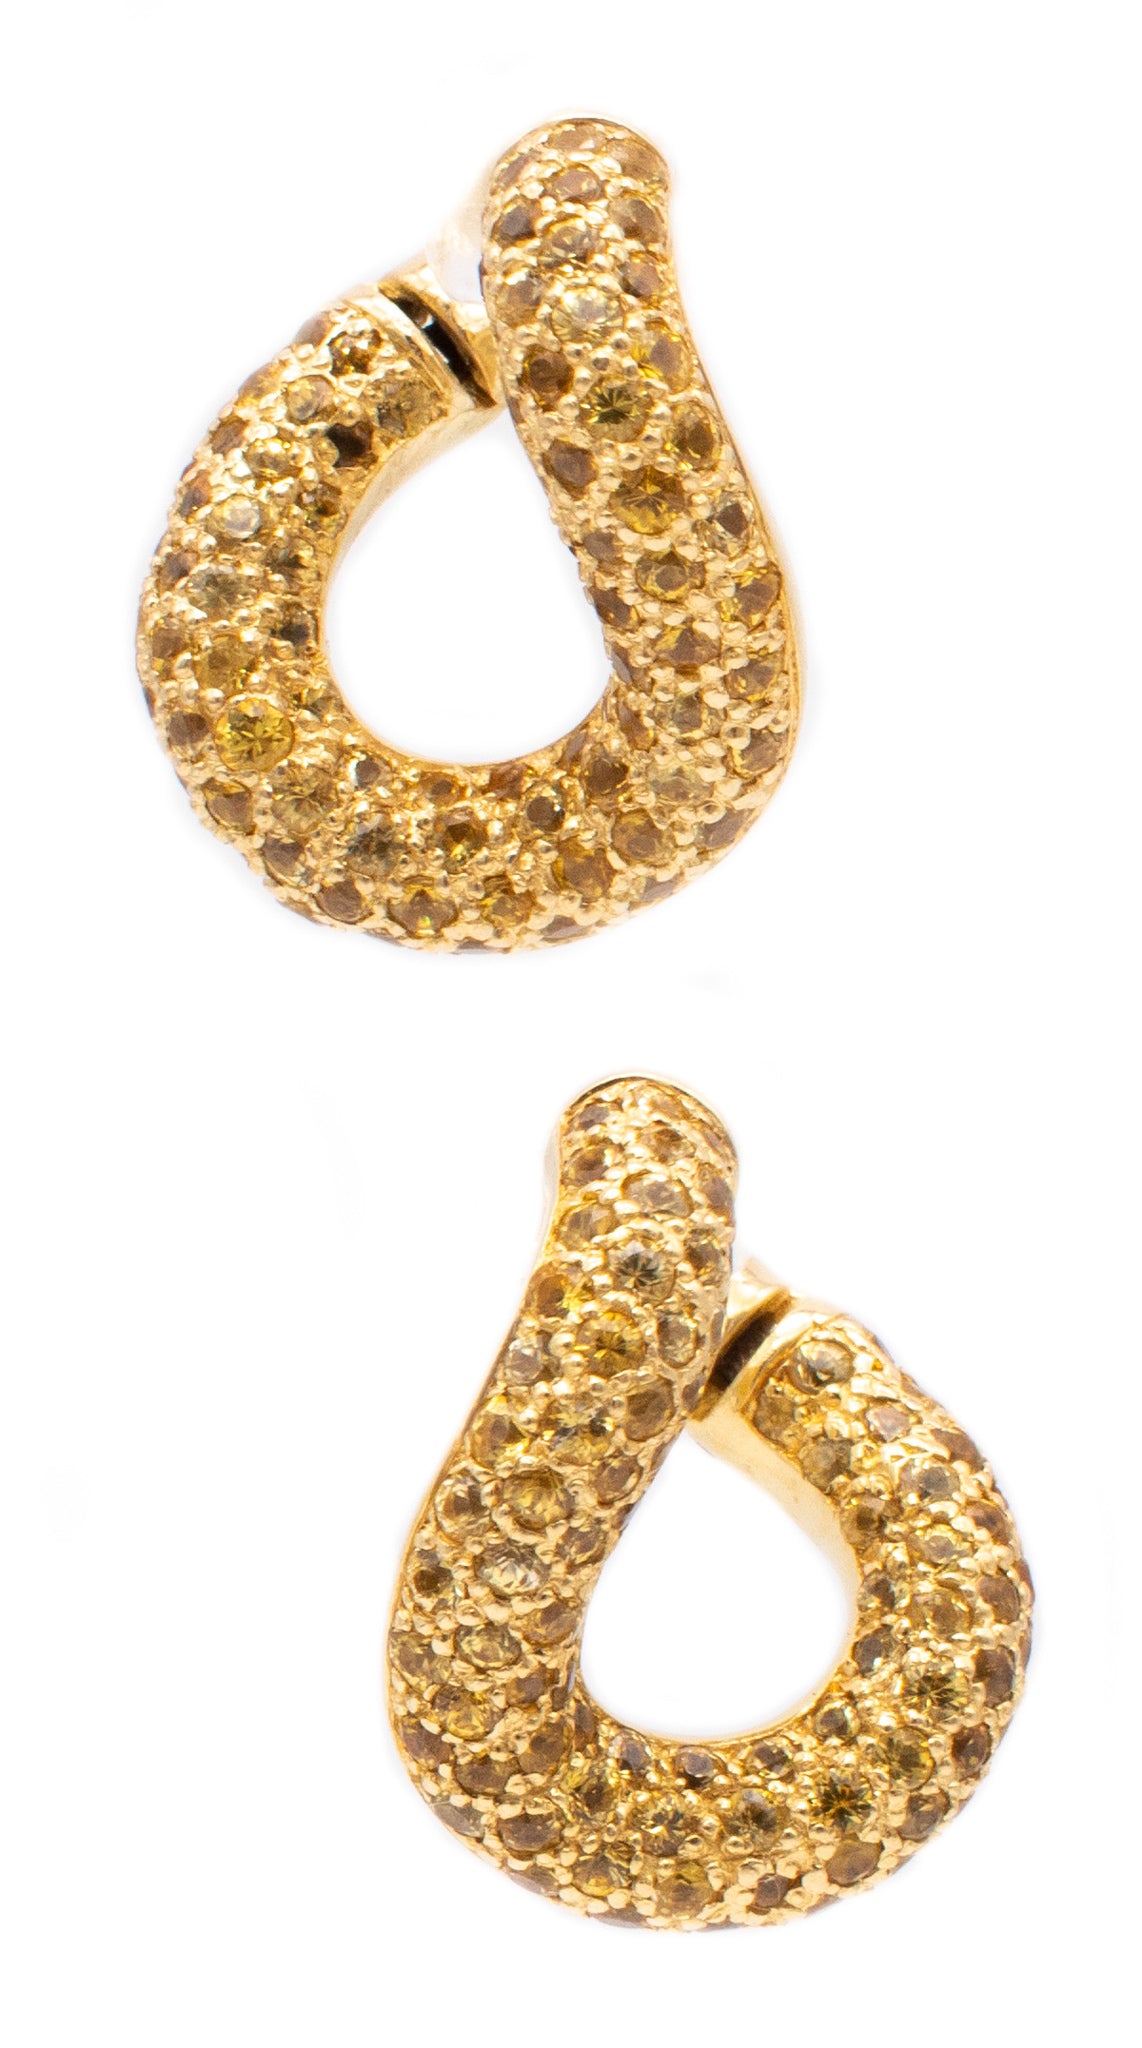 POMELLATO MILANO 18 KT GOLD GOURMETTE TWISTED HOOP EARRINGS WITH 4.2 Ctw OF SAPPHIRES